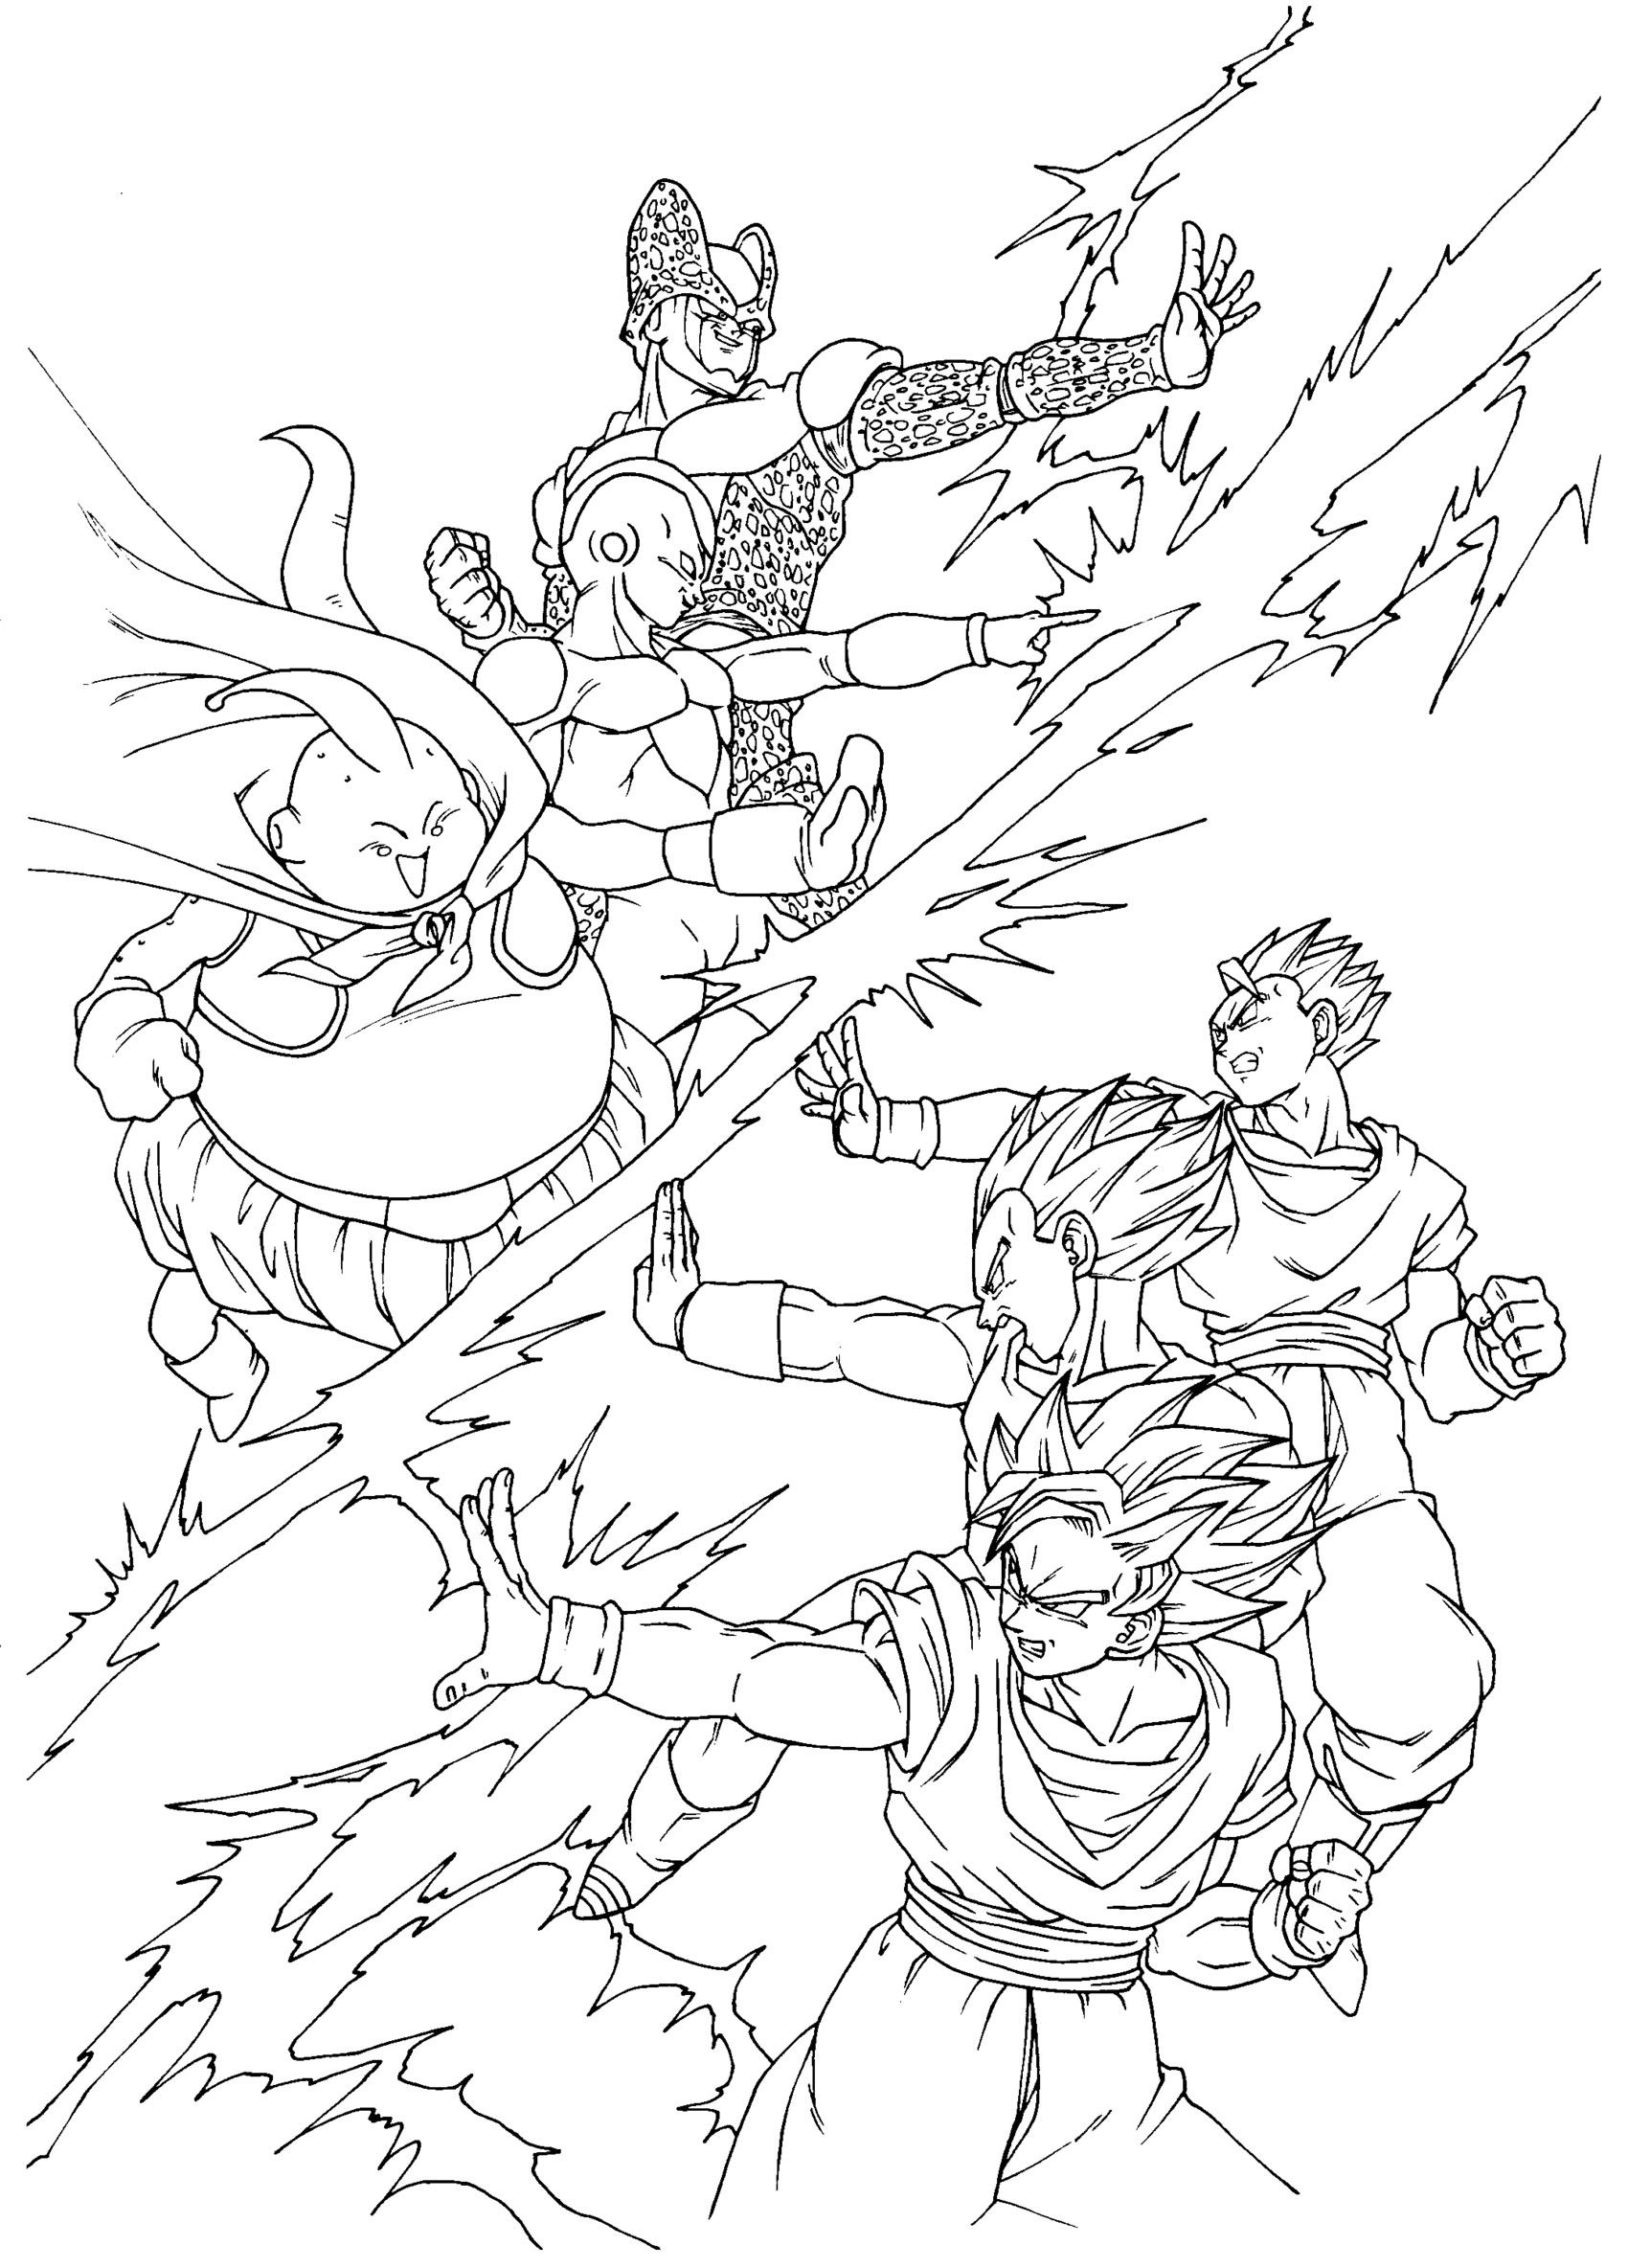 Songoku , Vegeta , SonGohan against Cell , Boo and Freezer - Dragon Ball Z Kids Coloring Pages